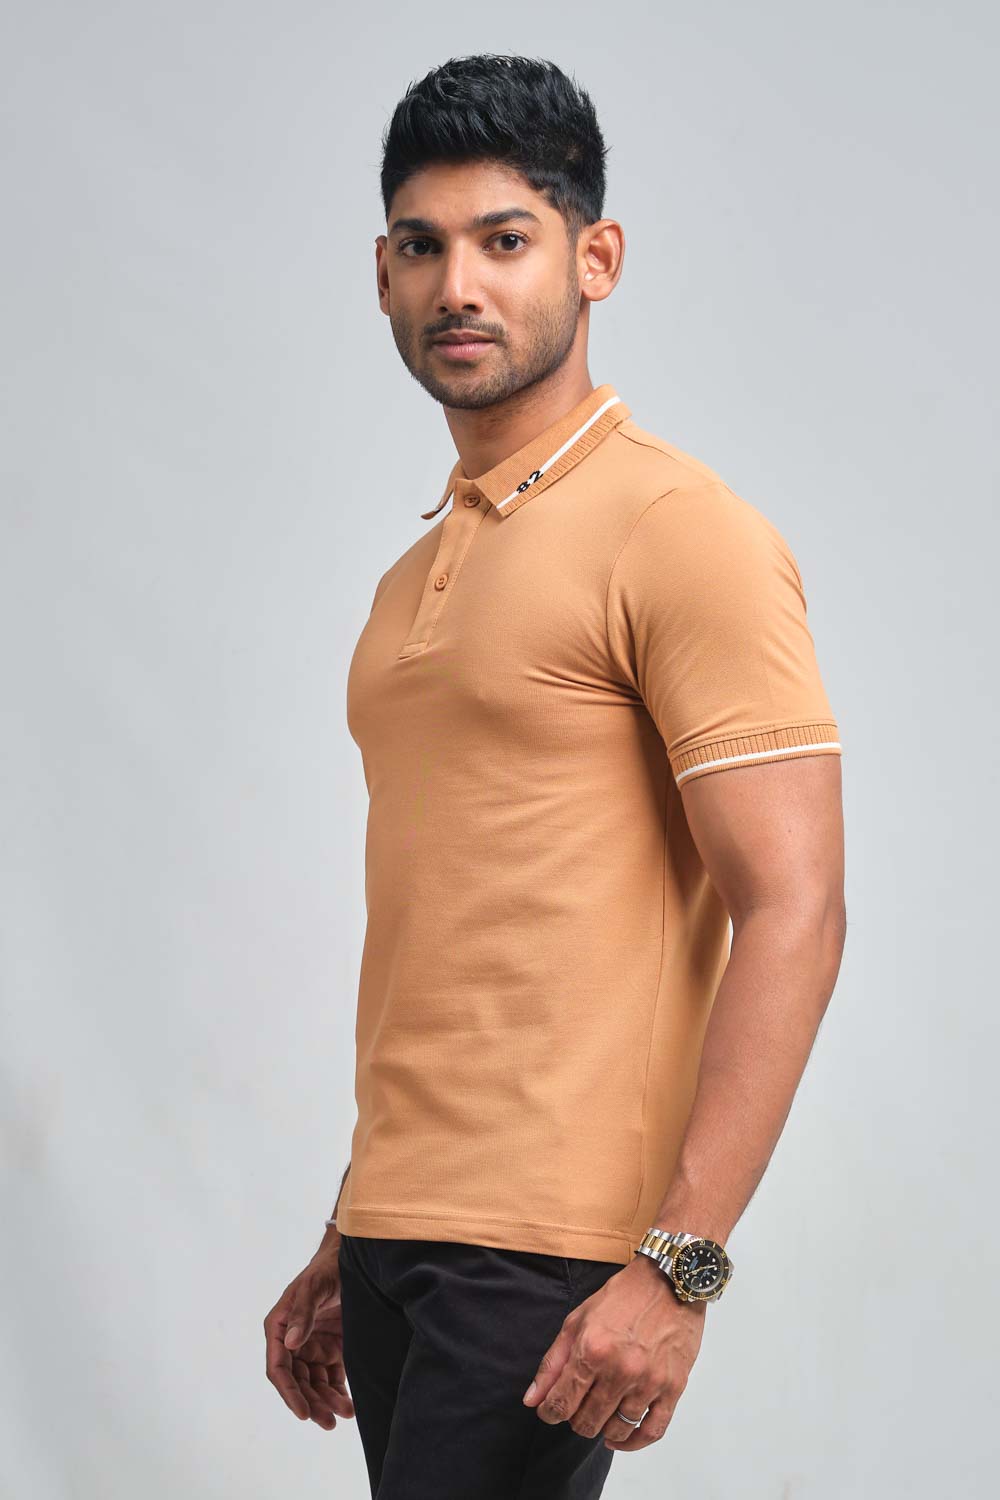 Plain premium cotton with 82 knitted collar, Slim fit polo T-shirt